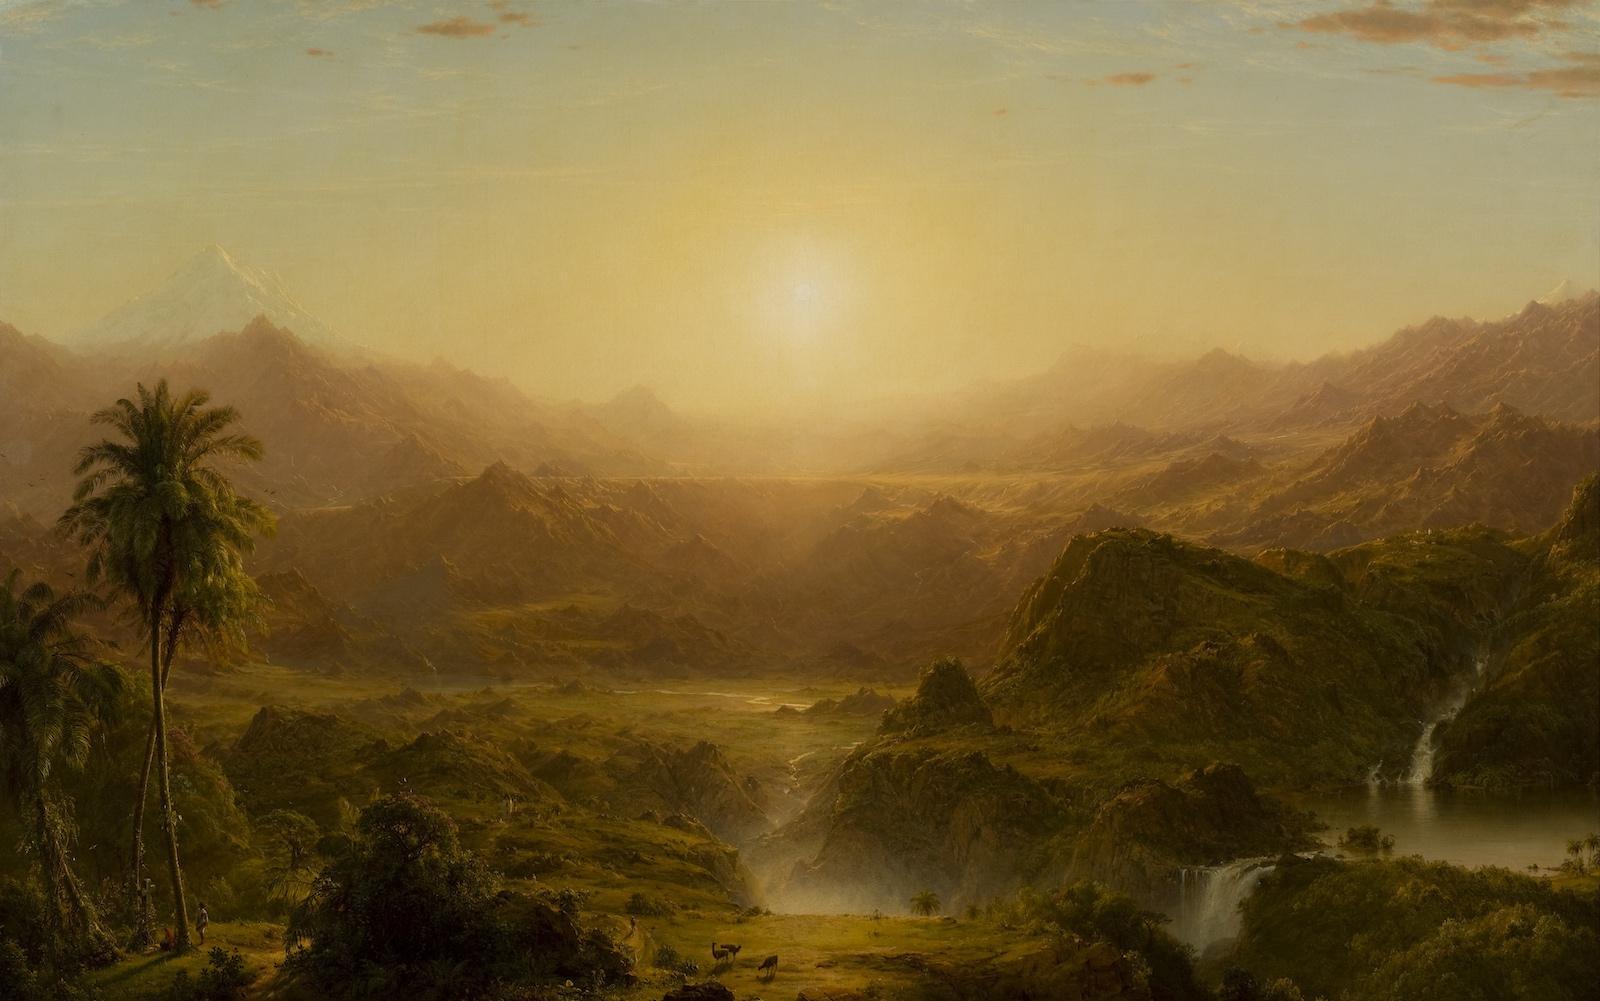 Frederic Edwin Church, The Andes of Ecuador, 1855. Oil on canvas, 59 5/8 x 87 1/2 in. Reynolda House Museum of American Art.